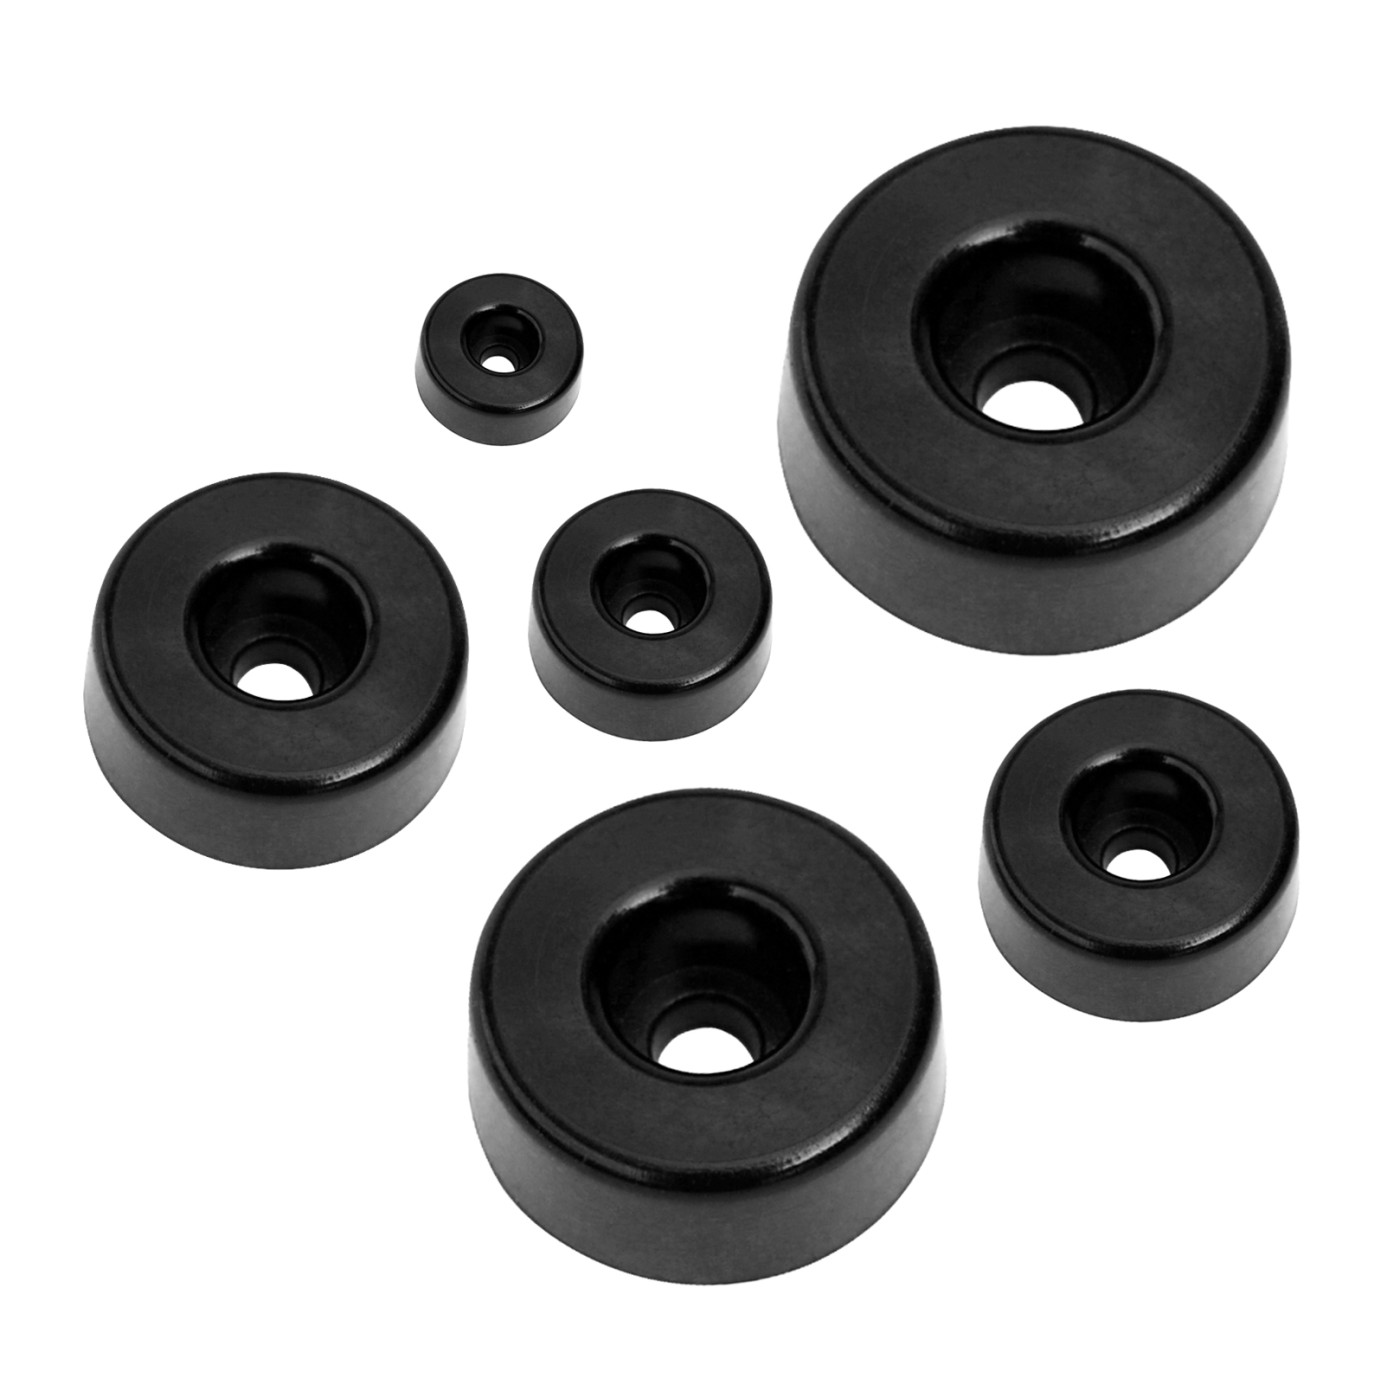 Set of 50 screwable buffers/bumpers/spacers (outside, round, 20